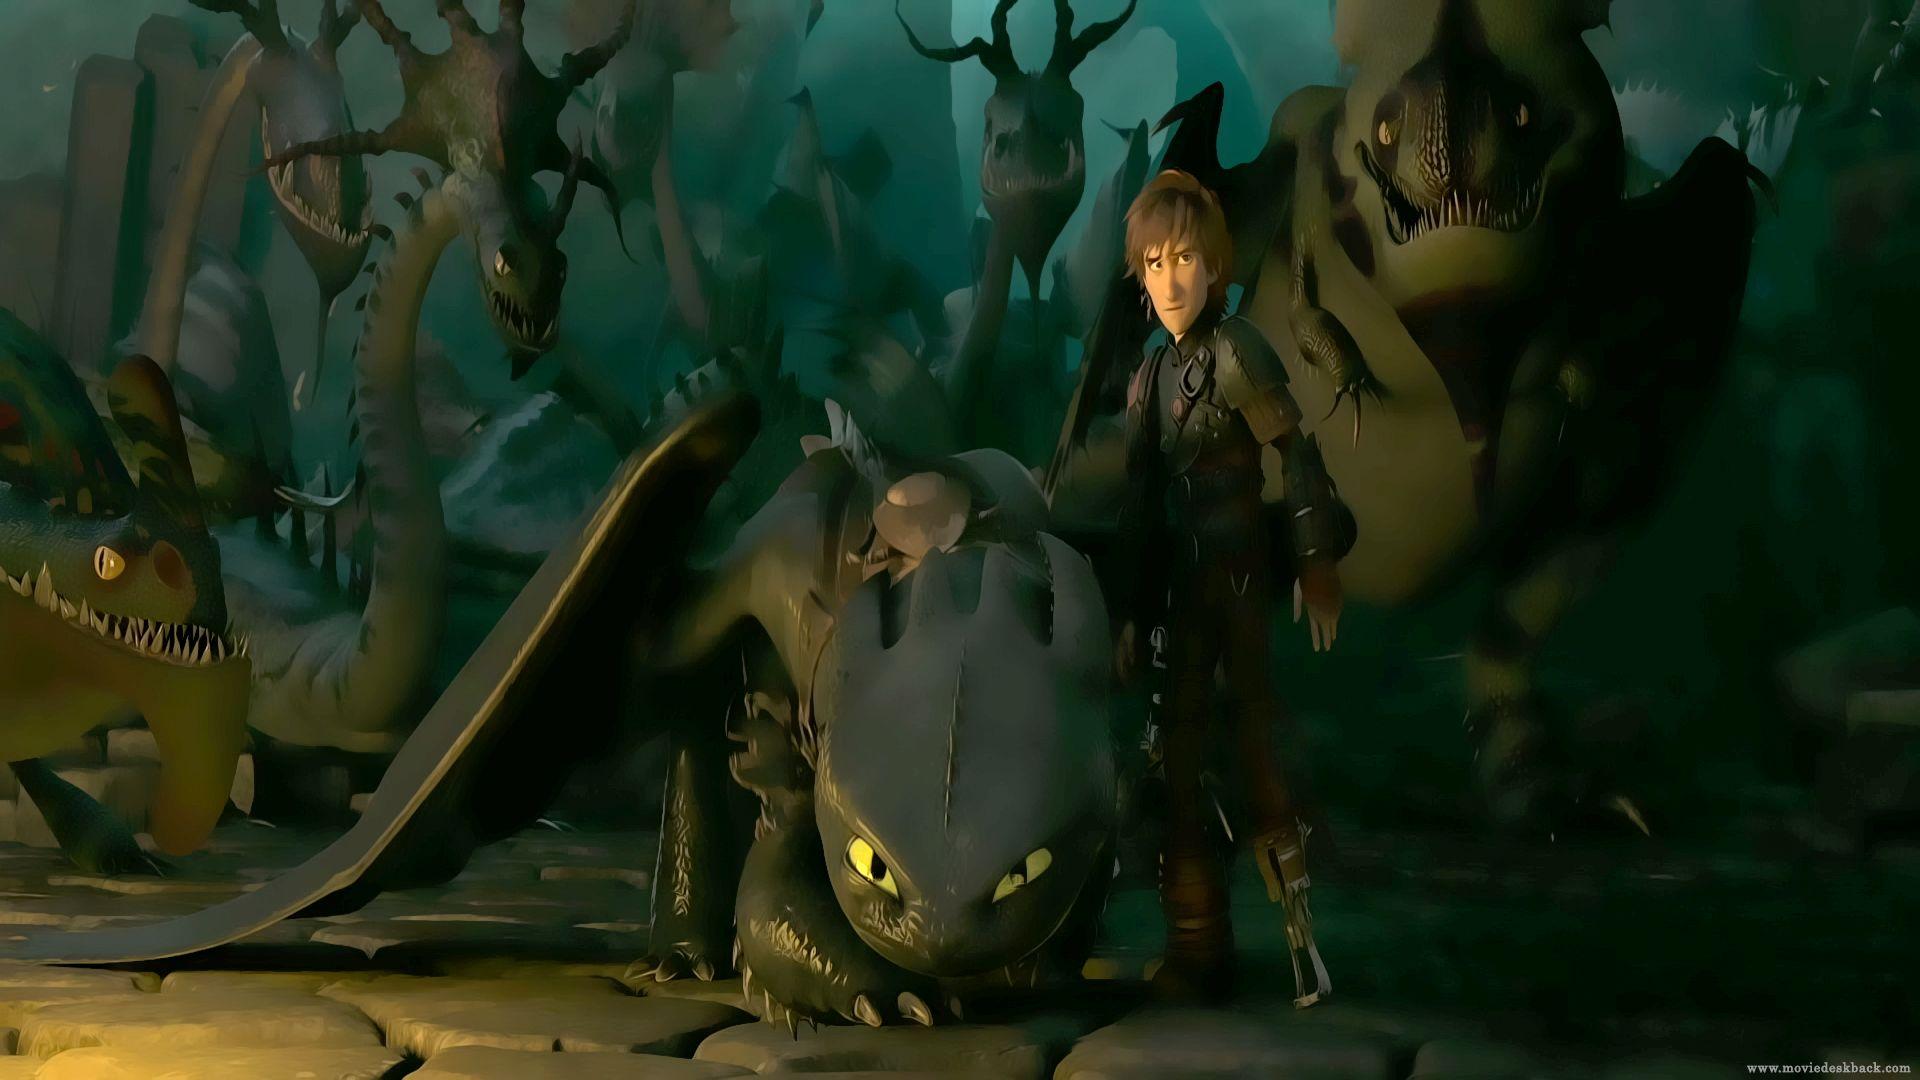 How To Train Your Dragon 2 Wallpaper, Live How To Train Your Dragon